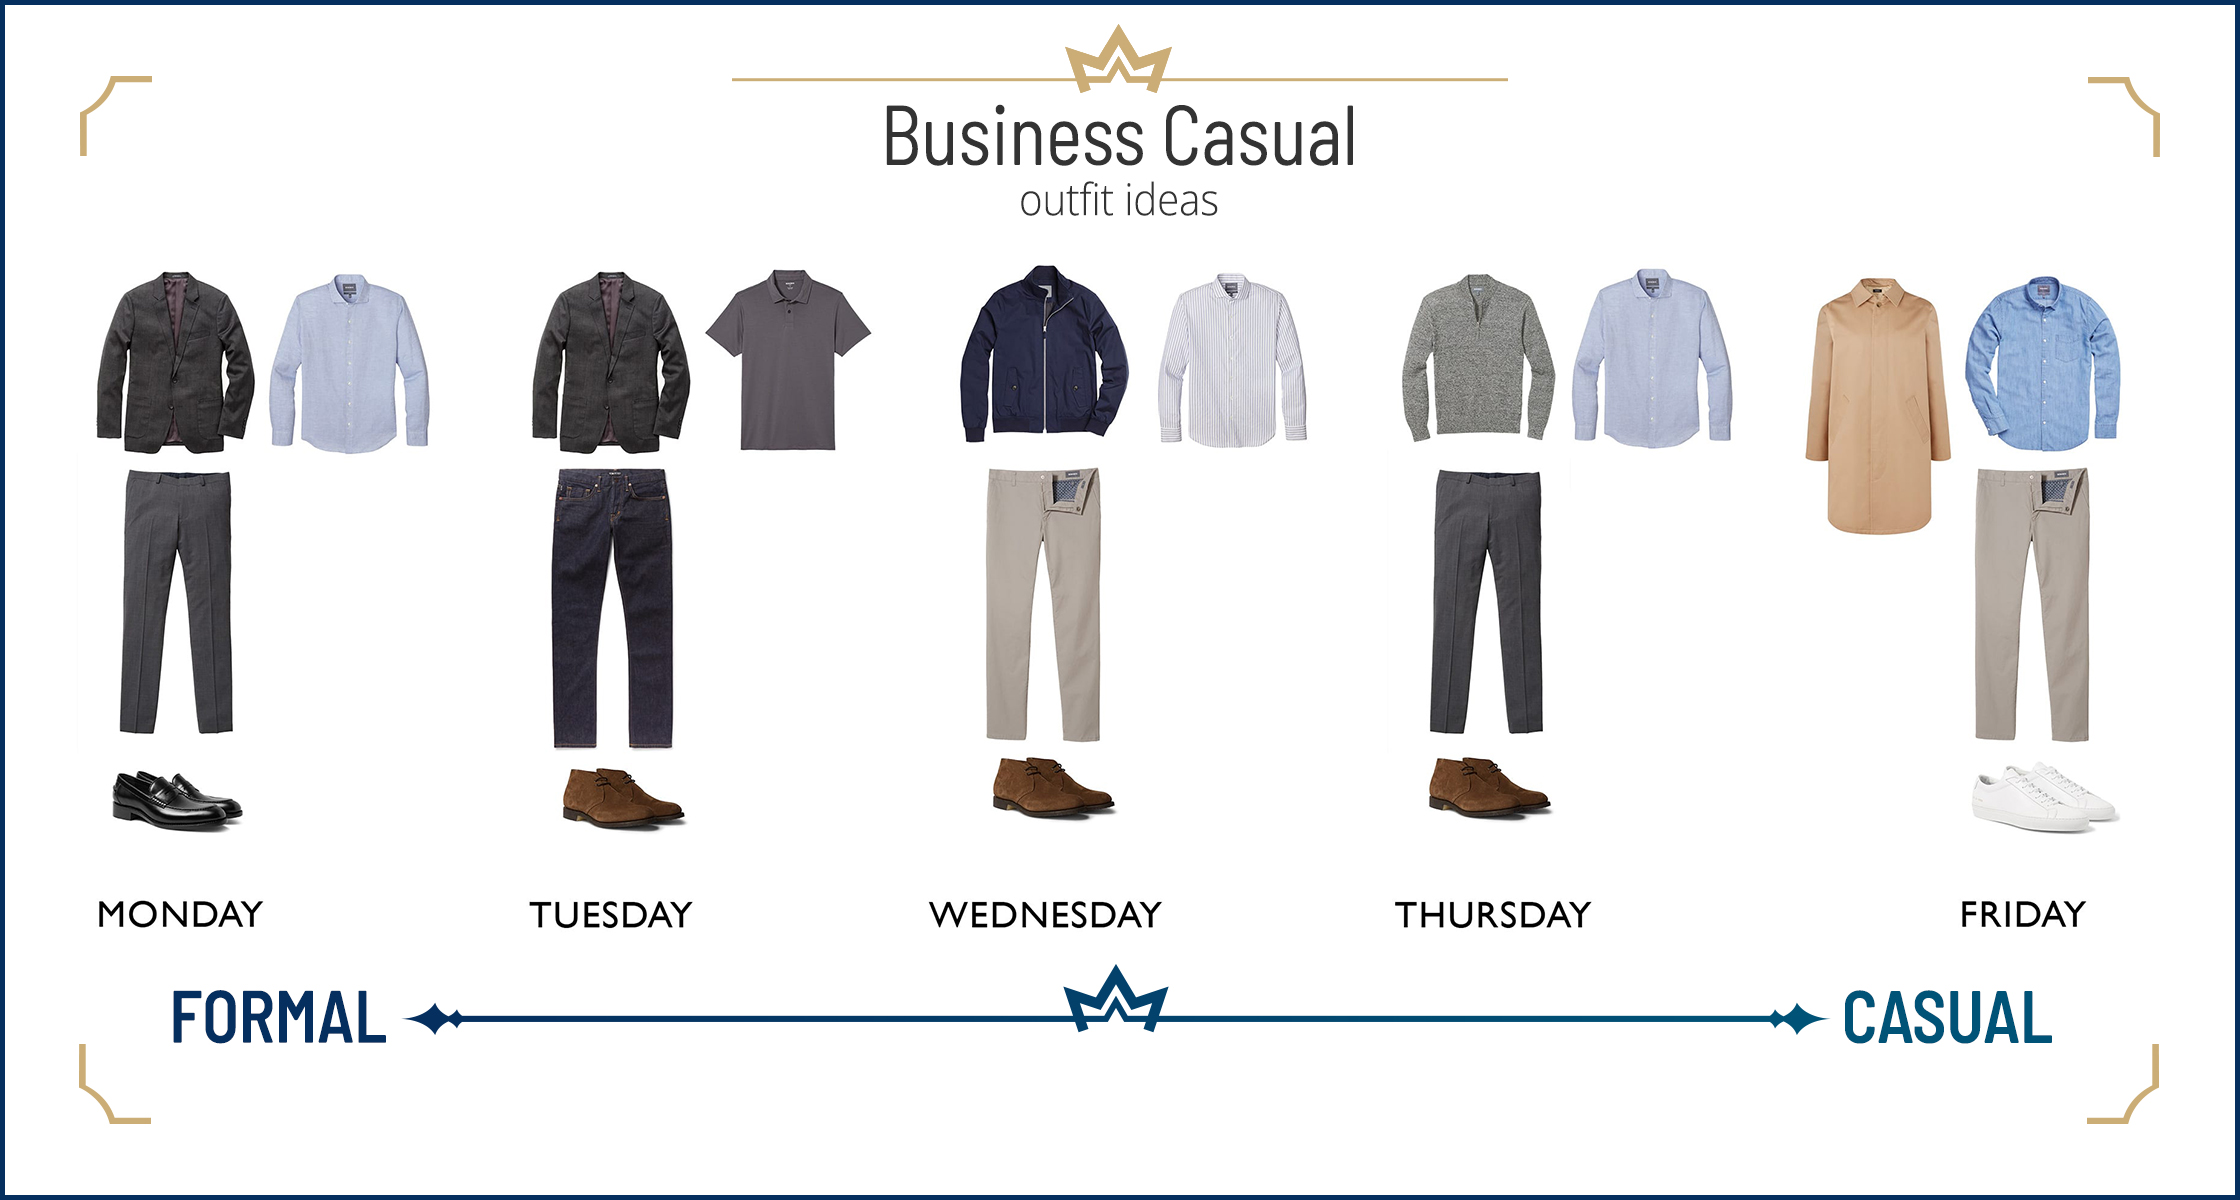 Different business casual outfit ideas for men